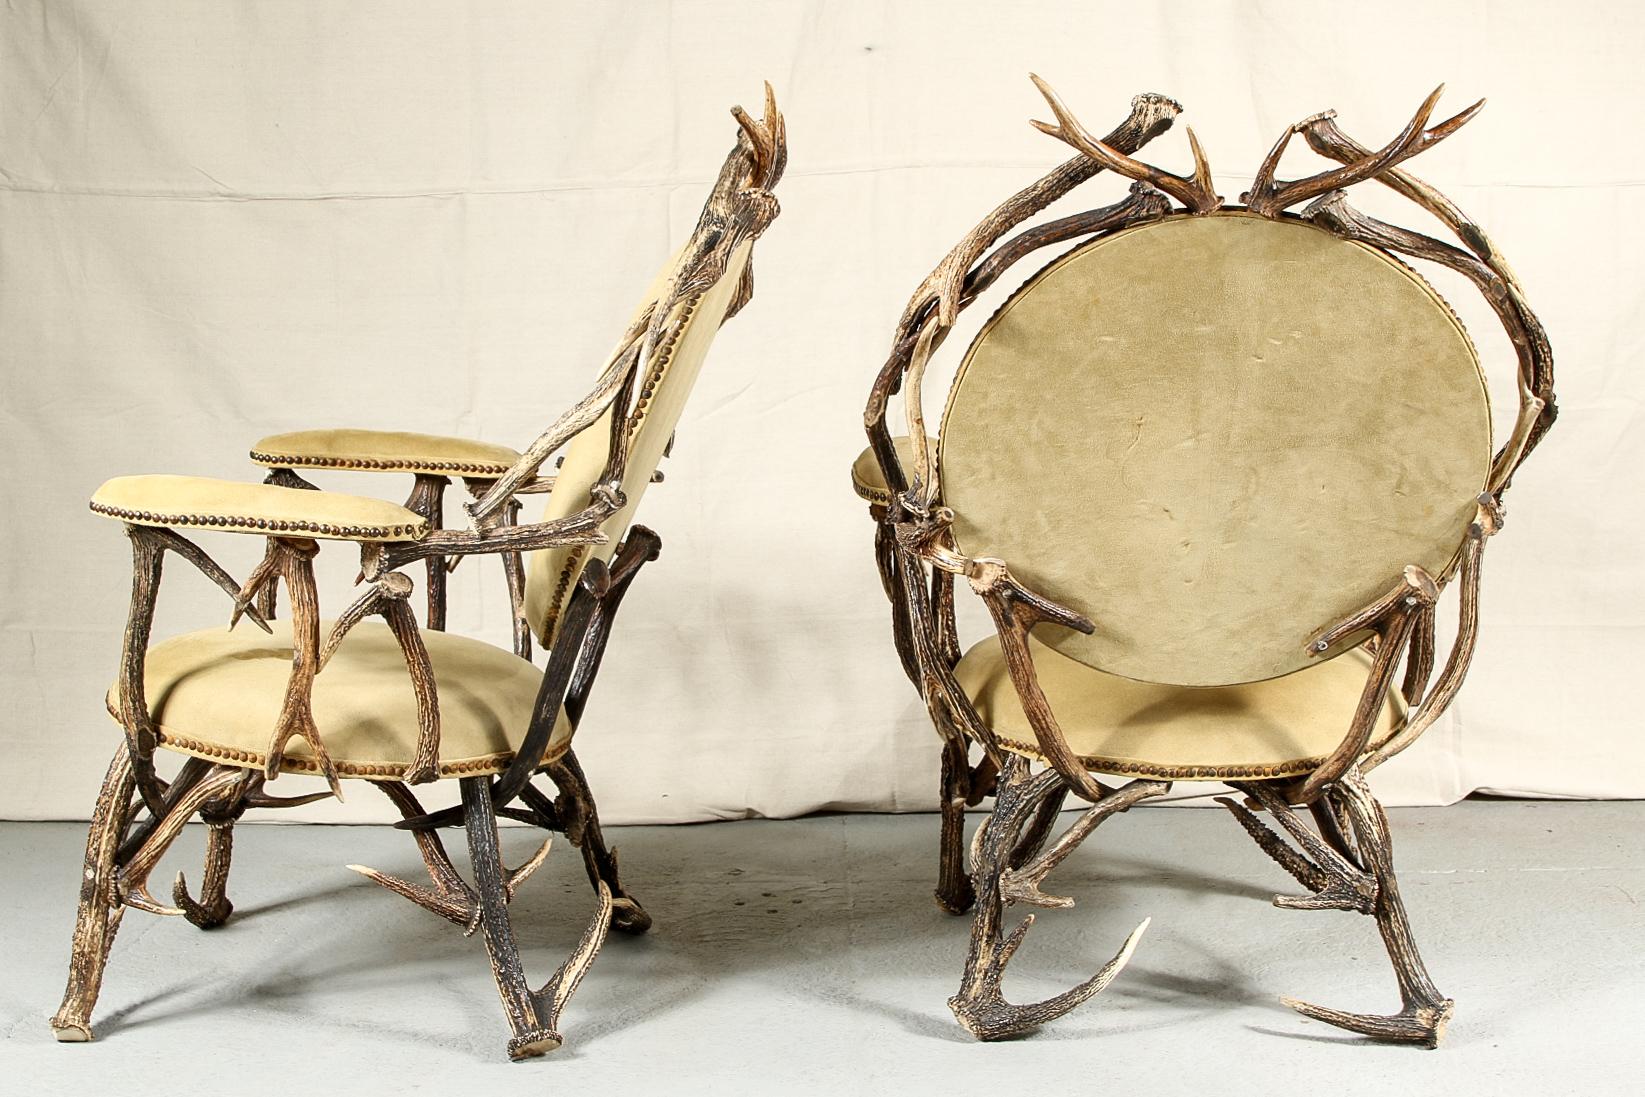 Rustic antler armchairs, elaborate antler construction with tan suede round seats and backs and curved arms with nail head trim.

Condition: Expected wear and signs of use including some staining to seats.